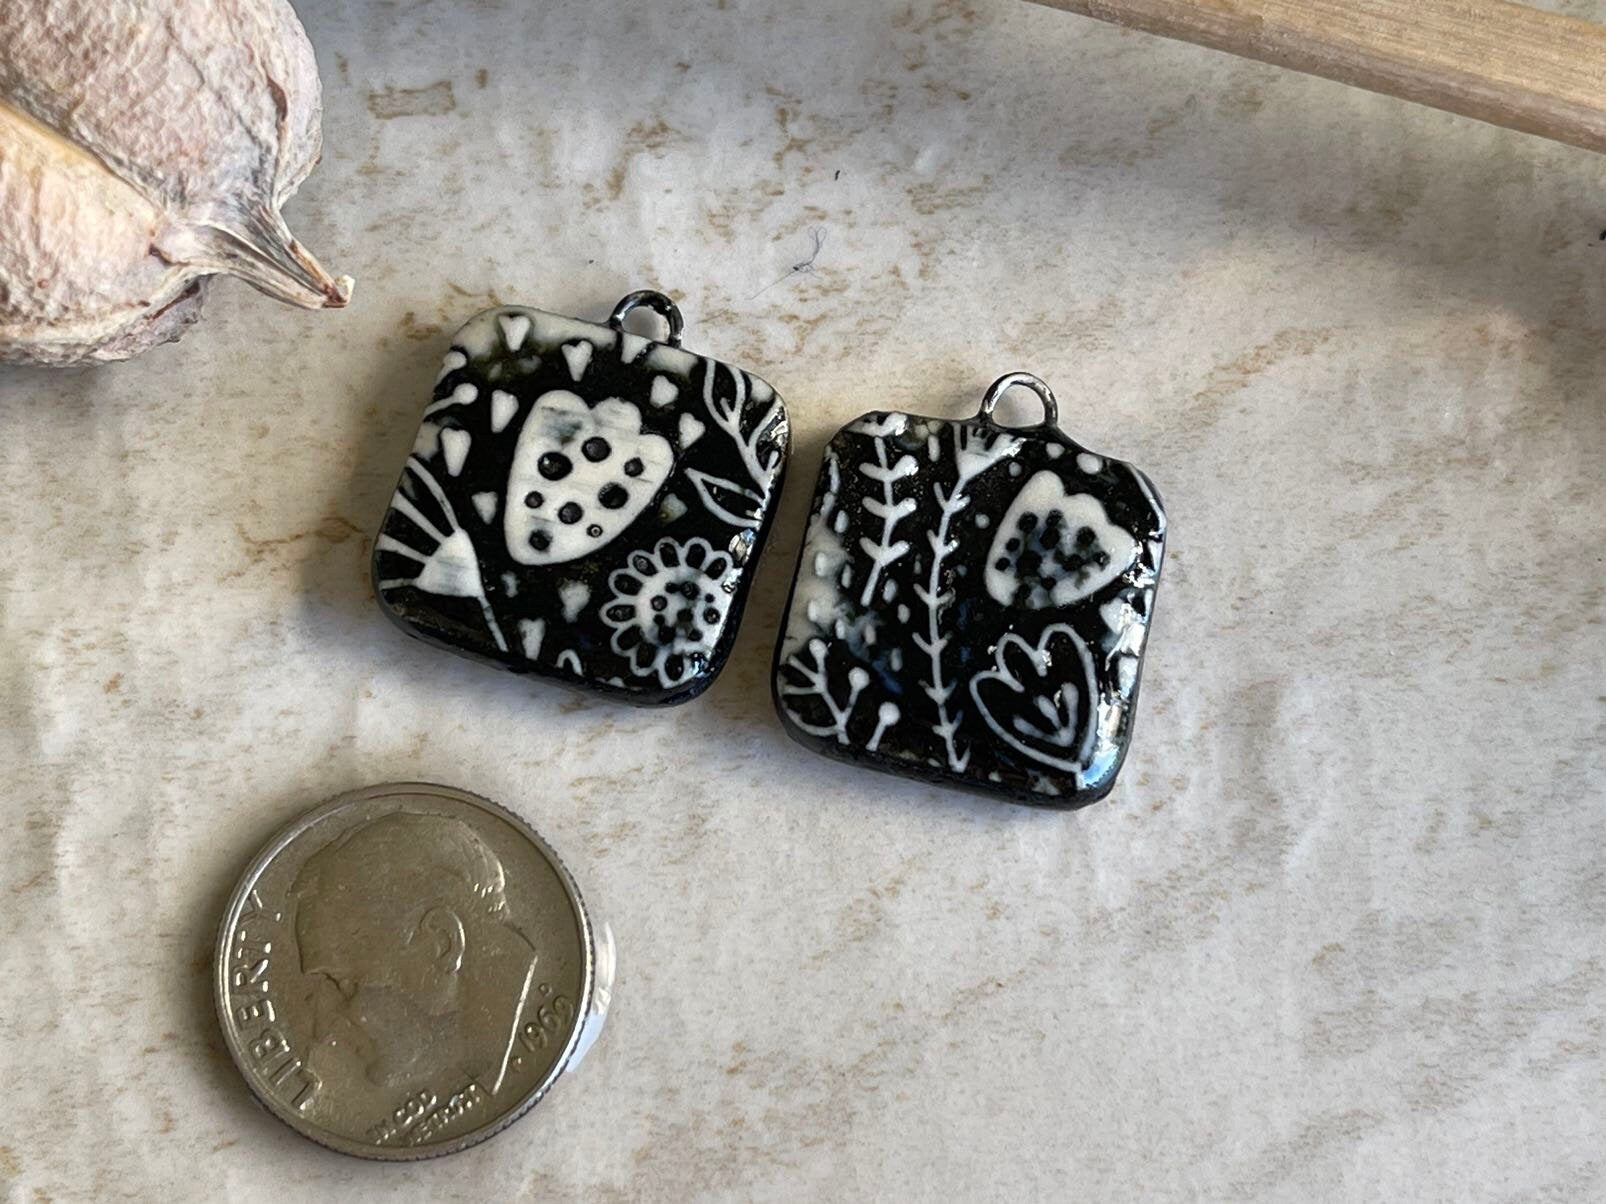 Black and White Flowers, Black Earring Bead Pair, Porcelain Ceramic Charms, Jewelry Making Components, Beading Handmade